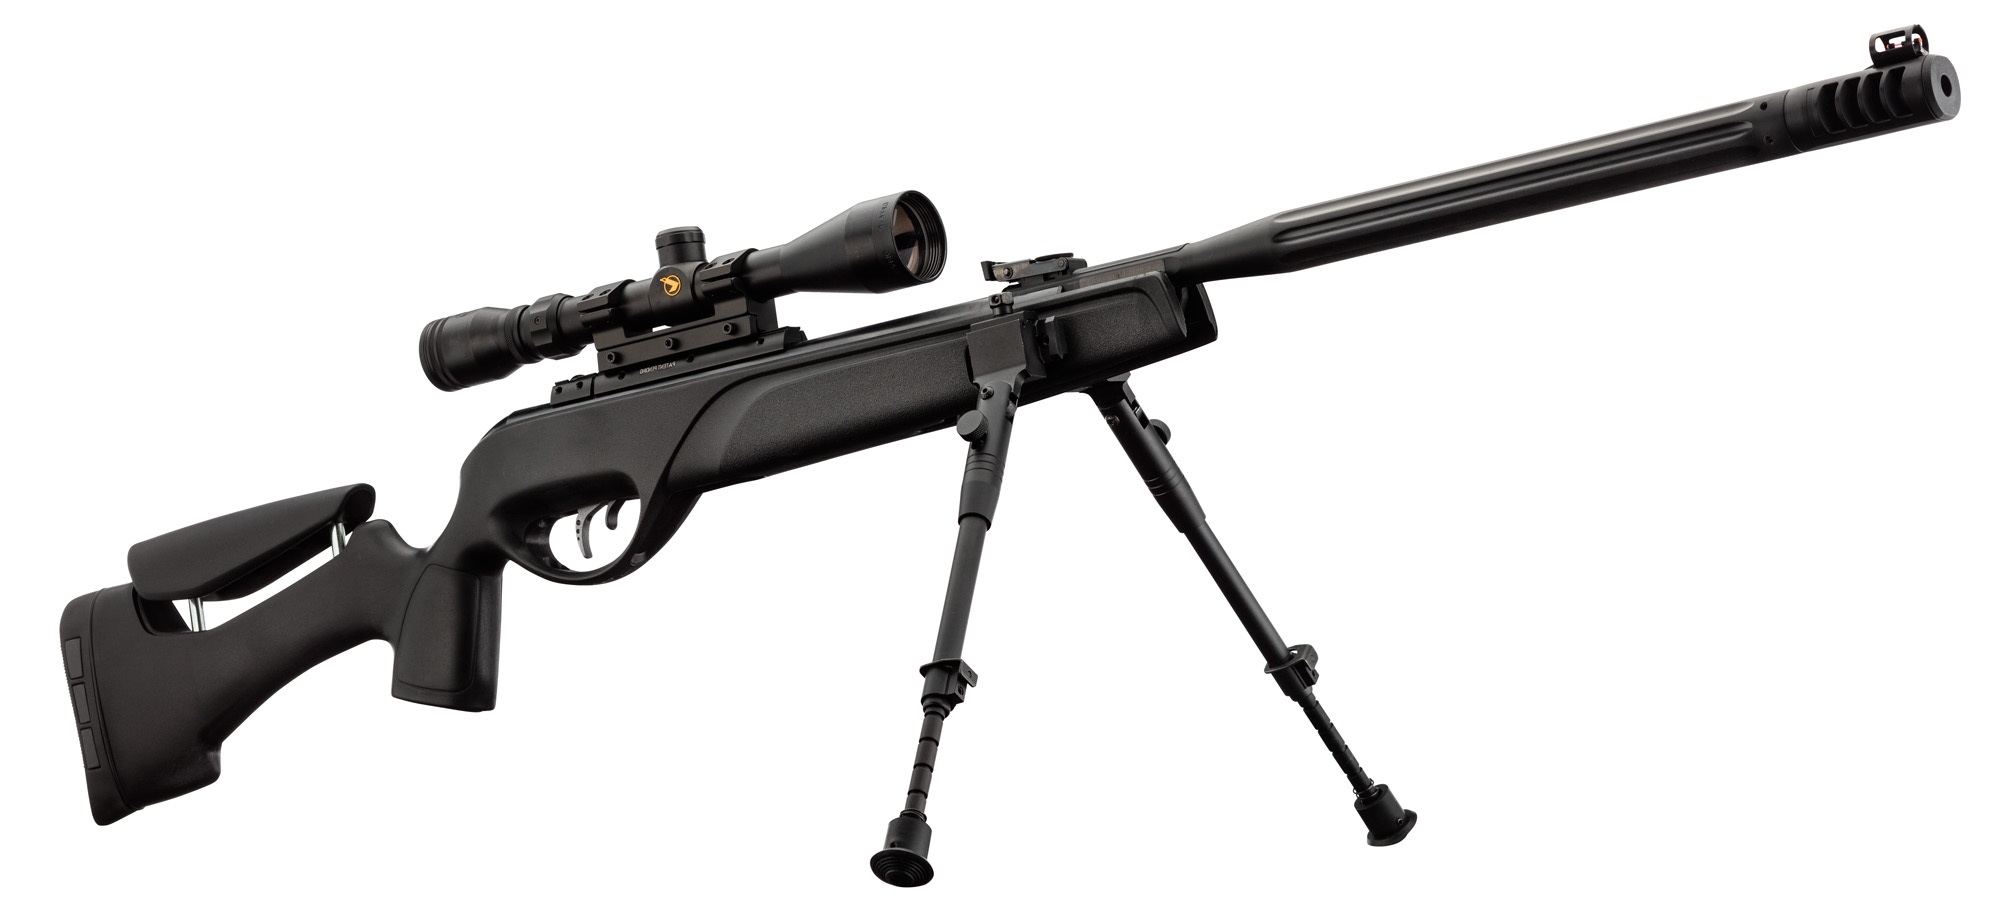 Carabine GAMO HPA IGT 19.9 joules cal. 4.5 mm + lunette 3-9 x 40